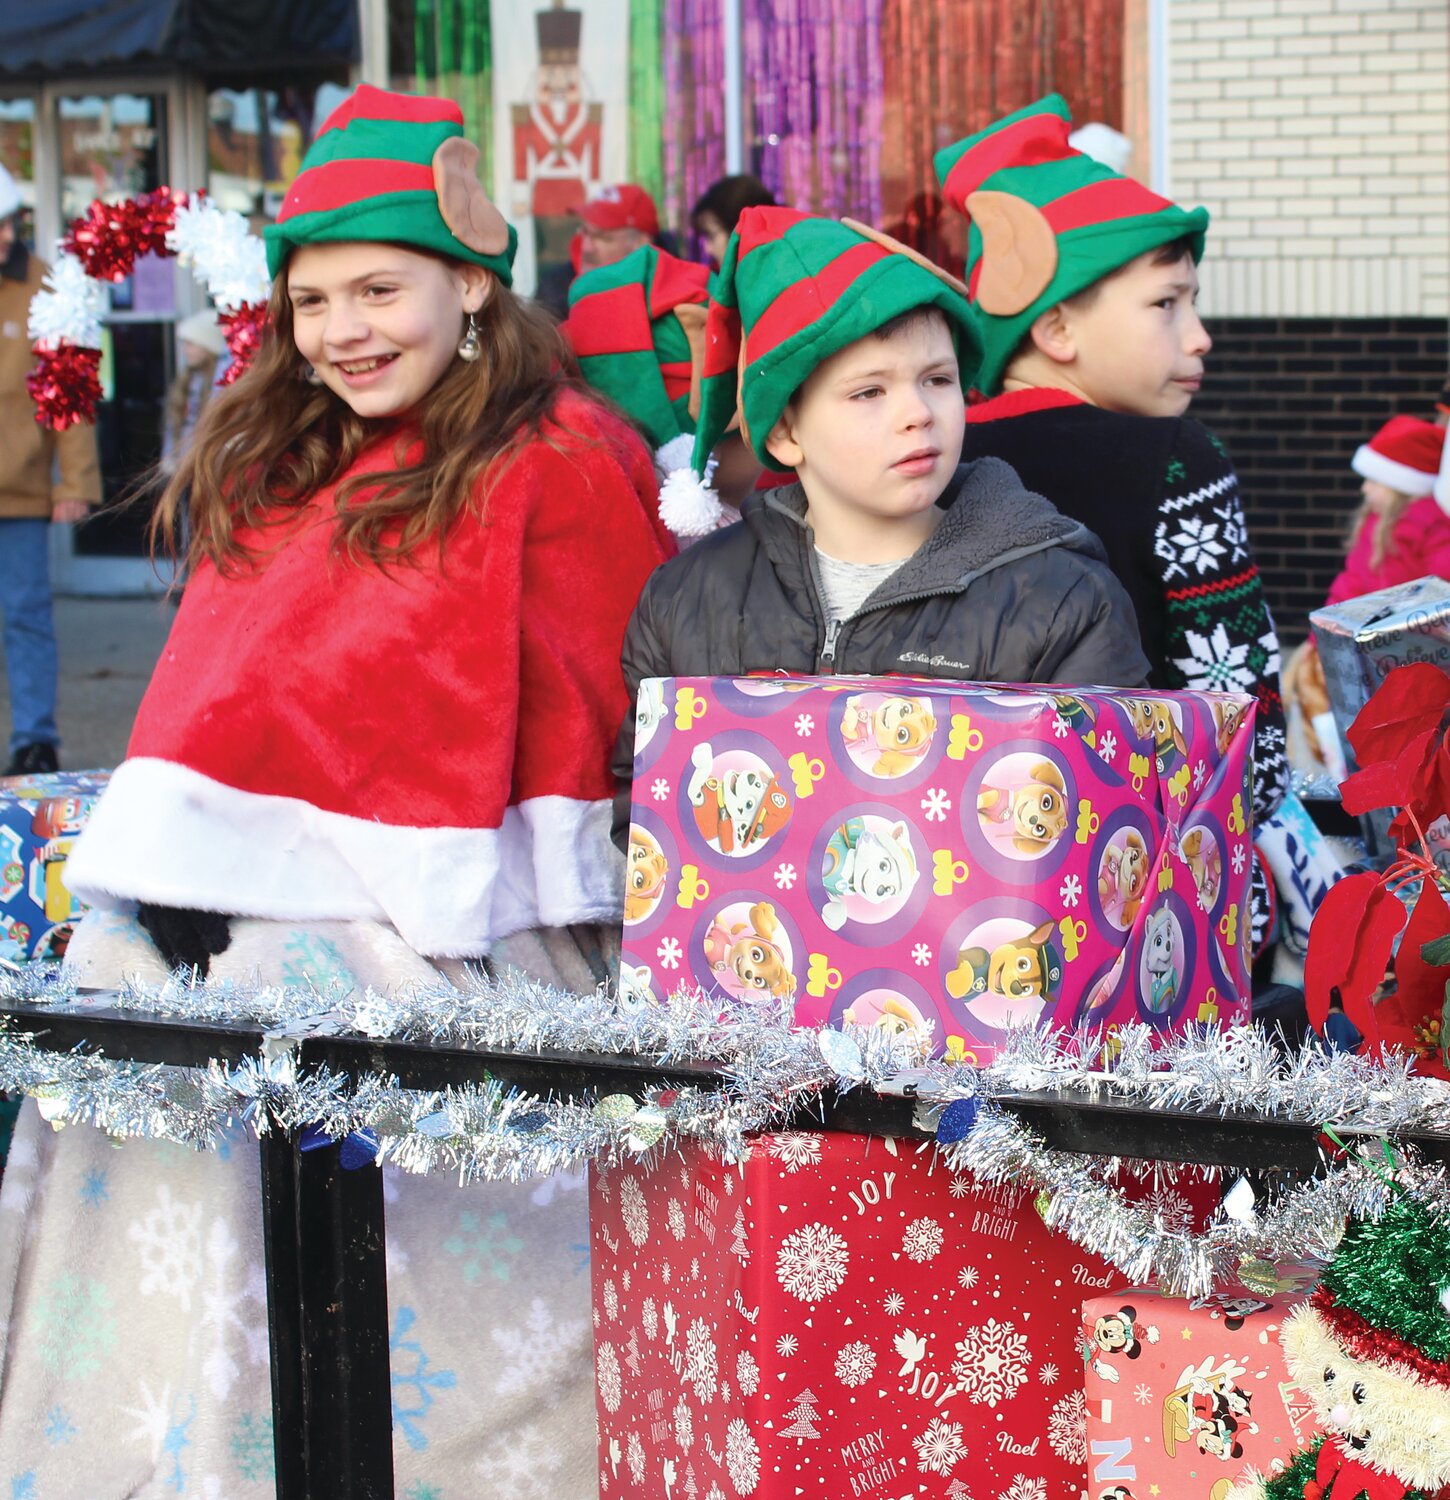 Three little elves spread Christmas cheer during the 2022 Christmas parade in downtown Crawfordsville.